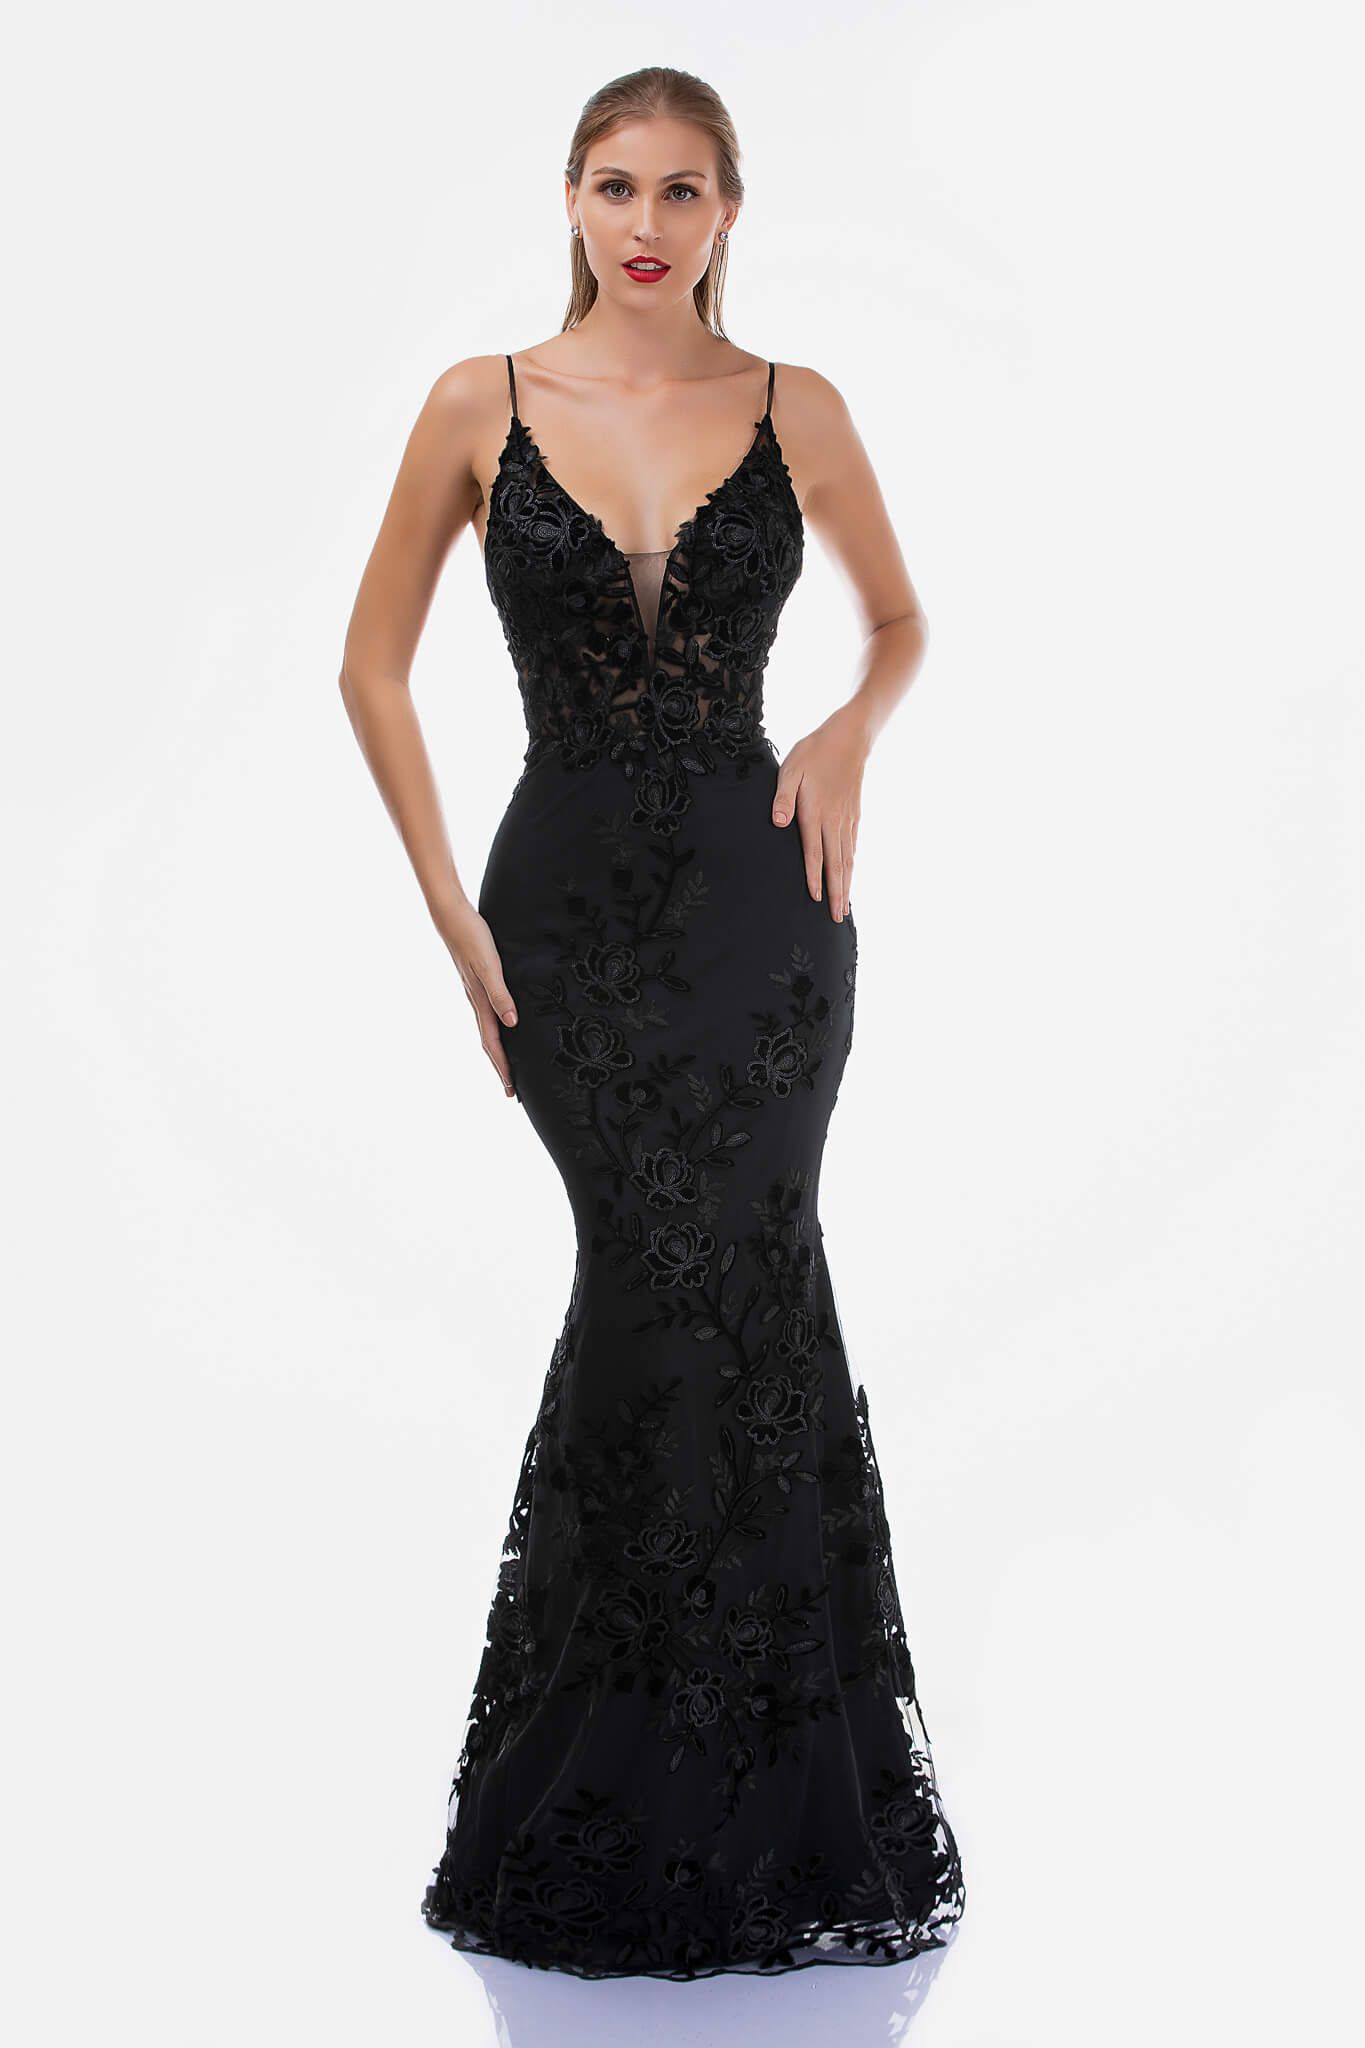 Style 2240 Nina Canacci Size 8 Prom Plunge Lace Black Mermaid Dress on Queenly